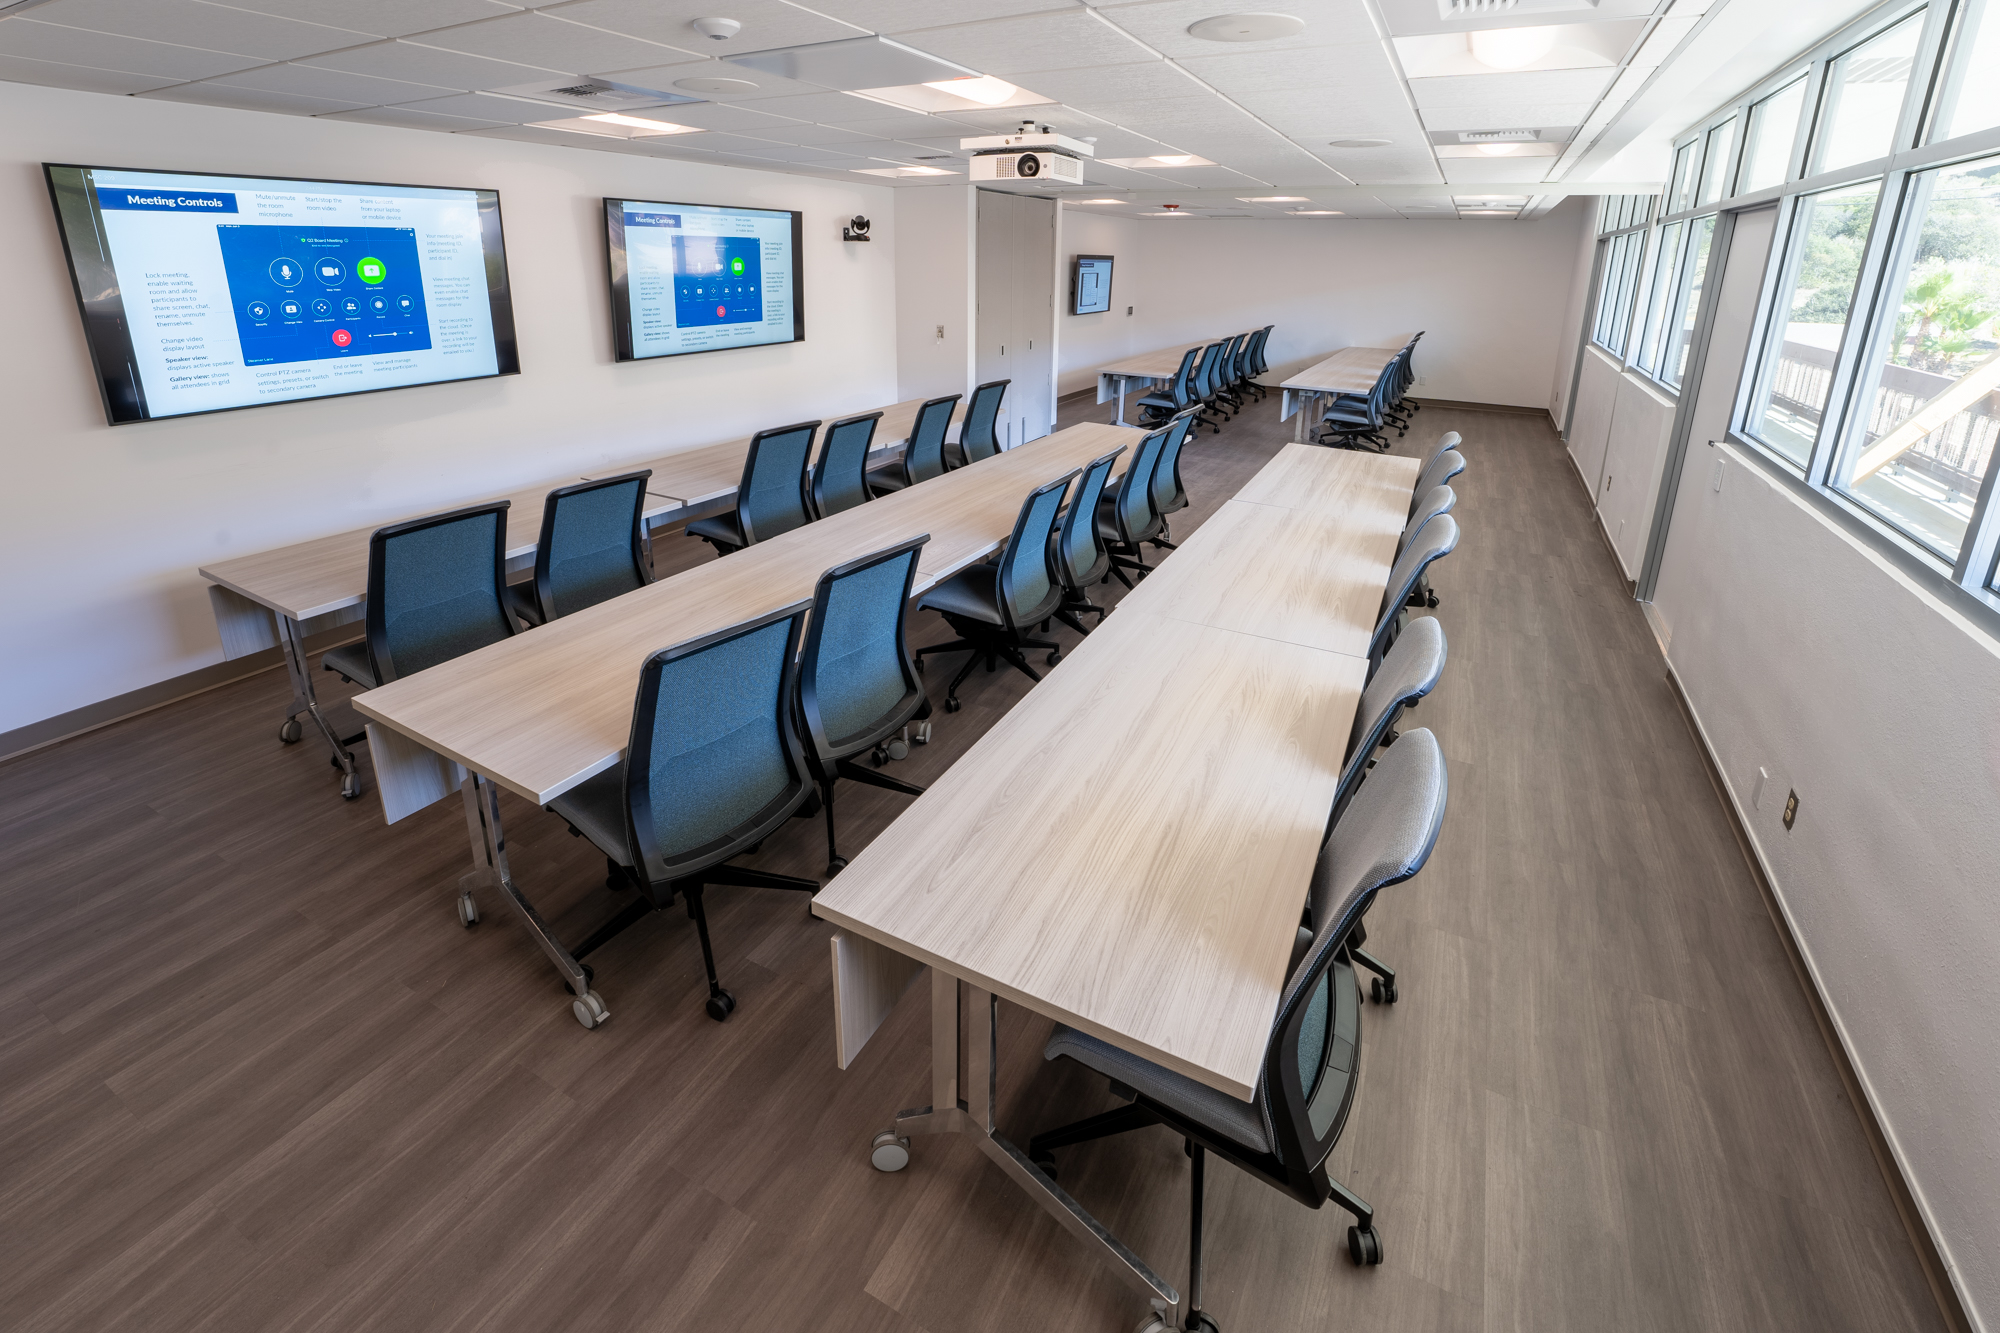 a conference room with large windows, three video monitors, and modular tables and chairs organized into a classroom configuration